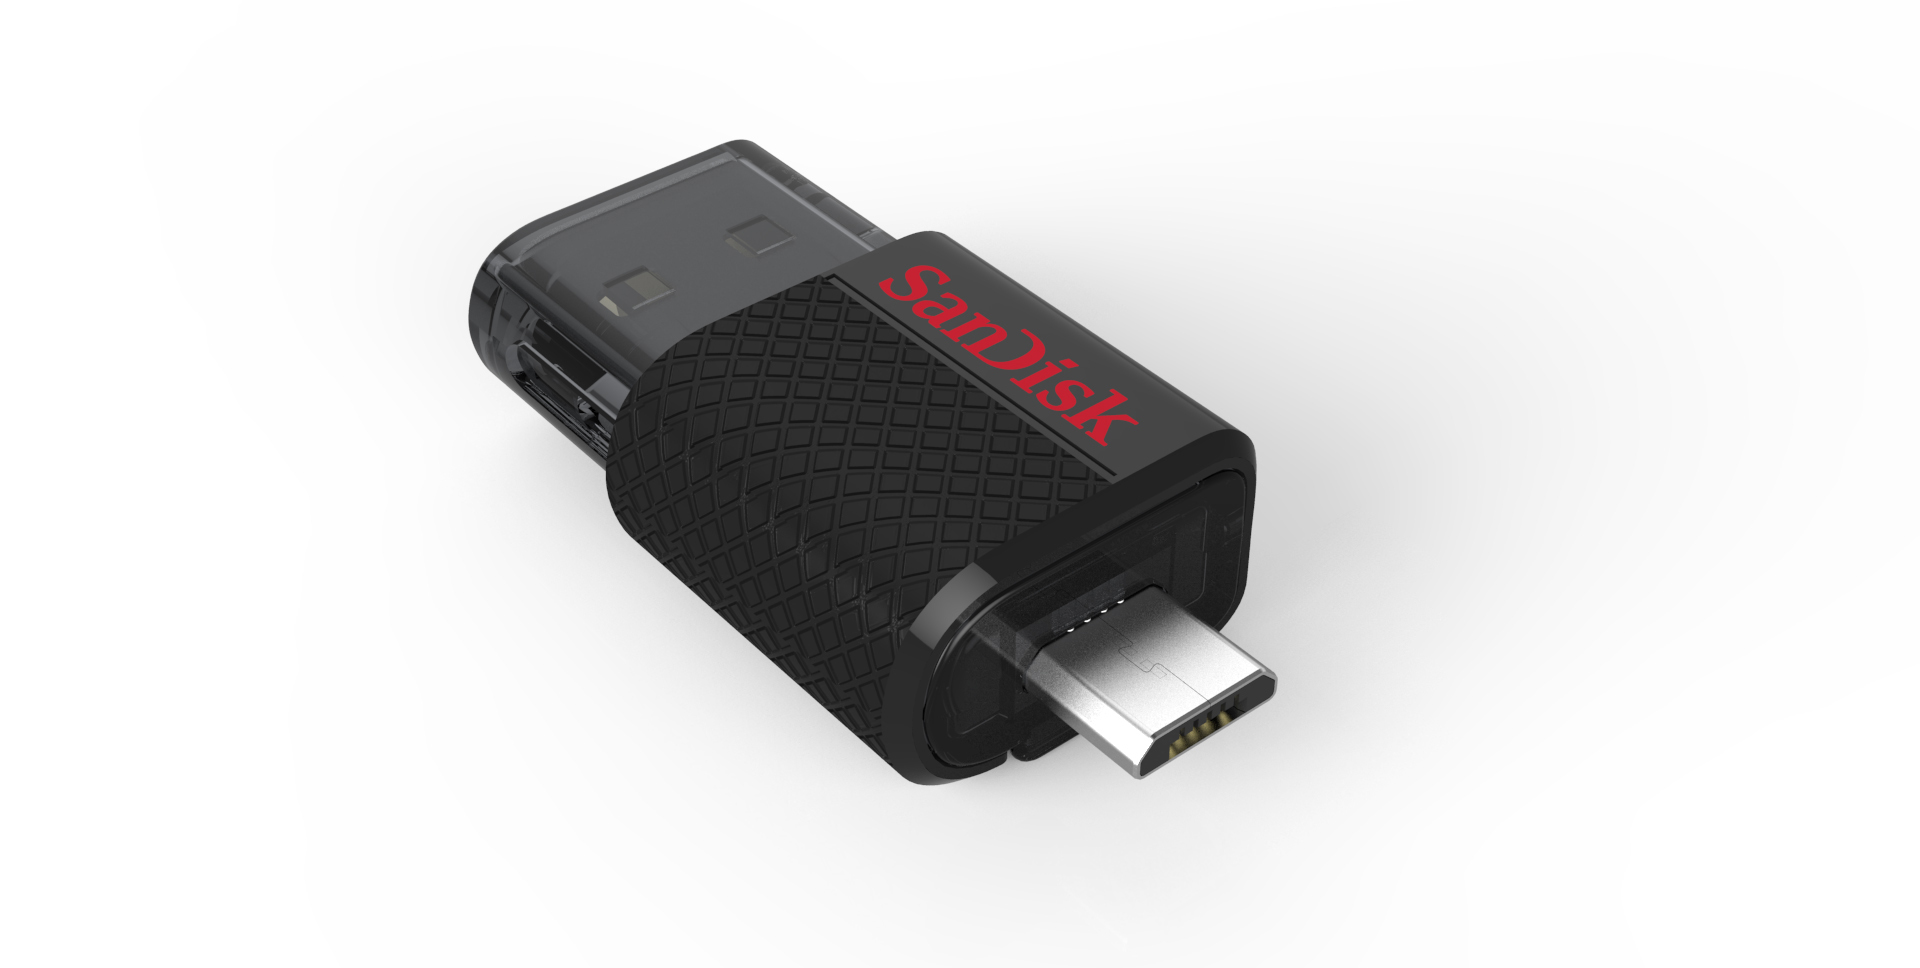 SanDisk Announces Its First Dual USB Drive Designed to Transfer and Backup Content Mobile Devices and Computers | Business Wire